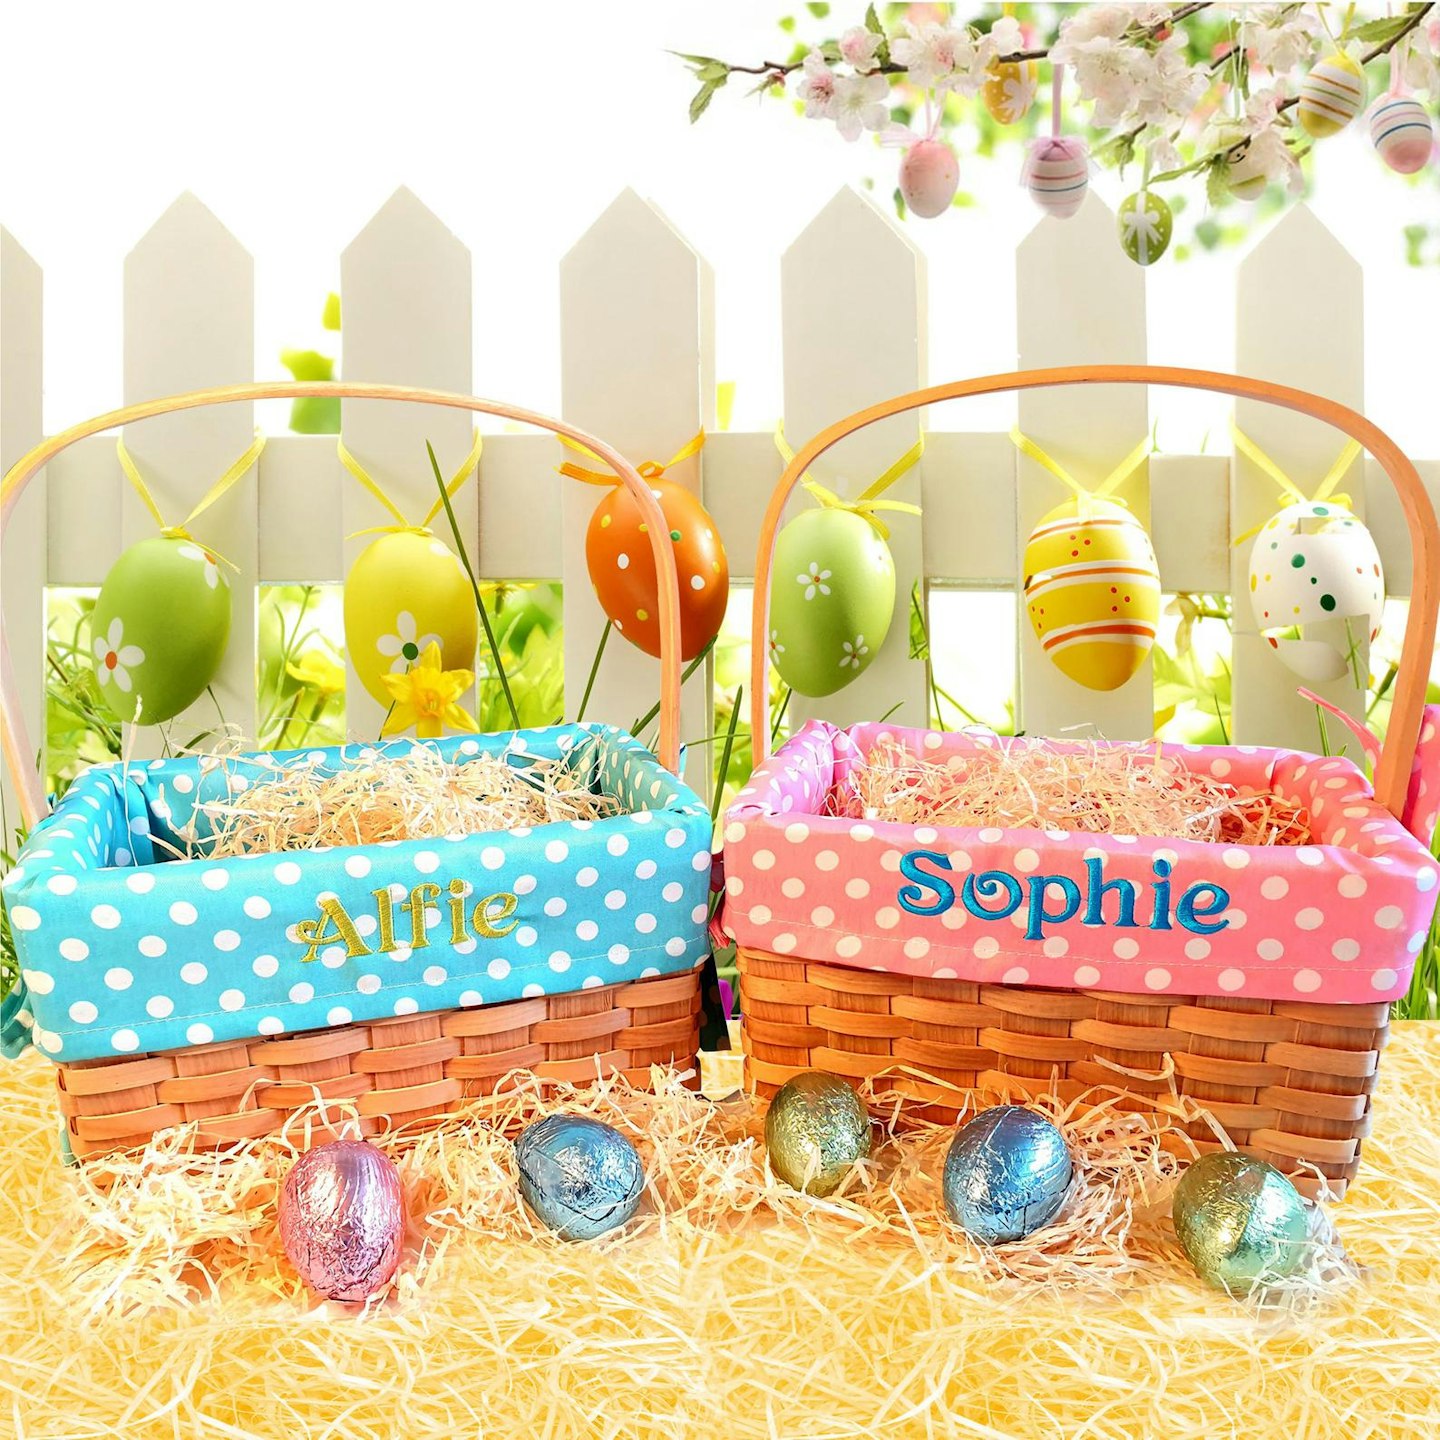 Personalised Embroidered Easter Gift Baskets